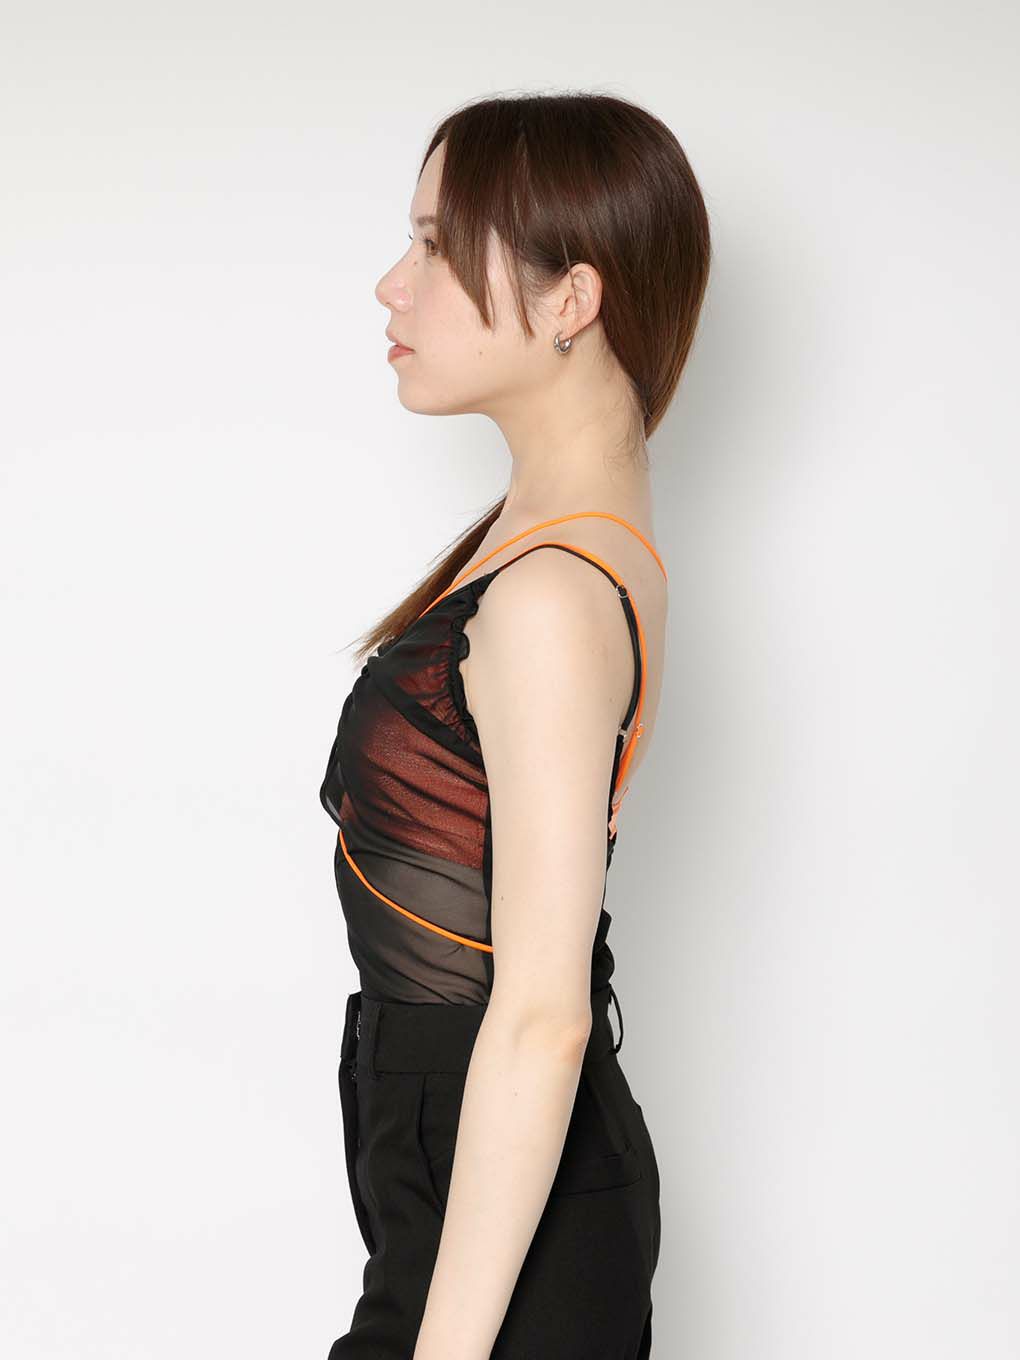 sheer cover camisole melt the lady | www.promoartadvertising.com